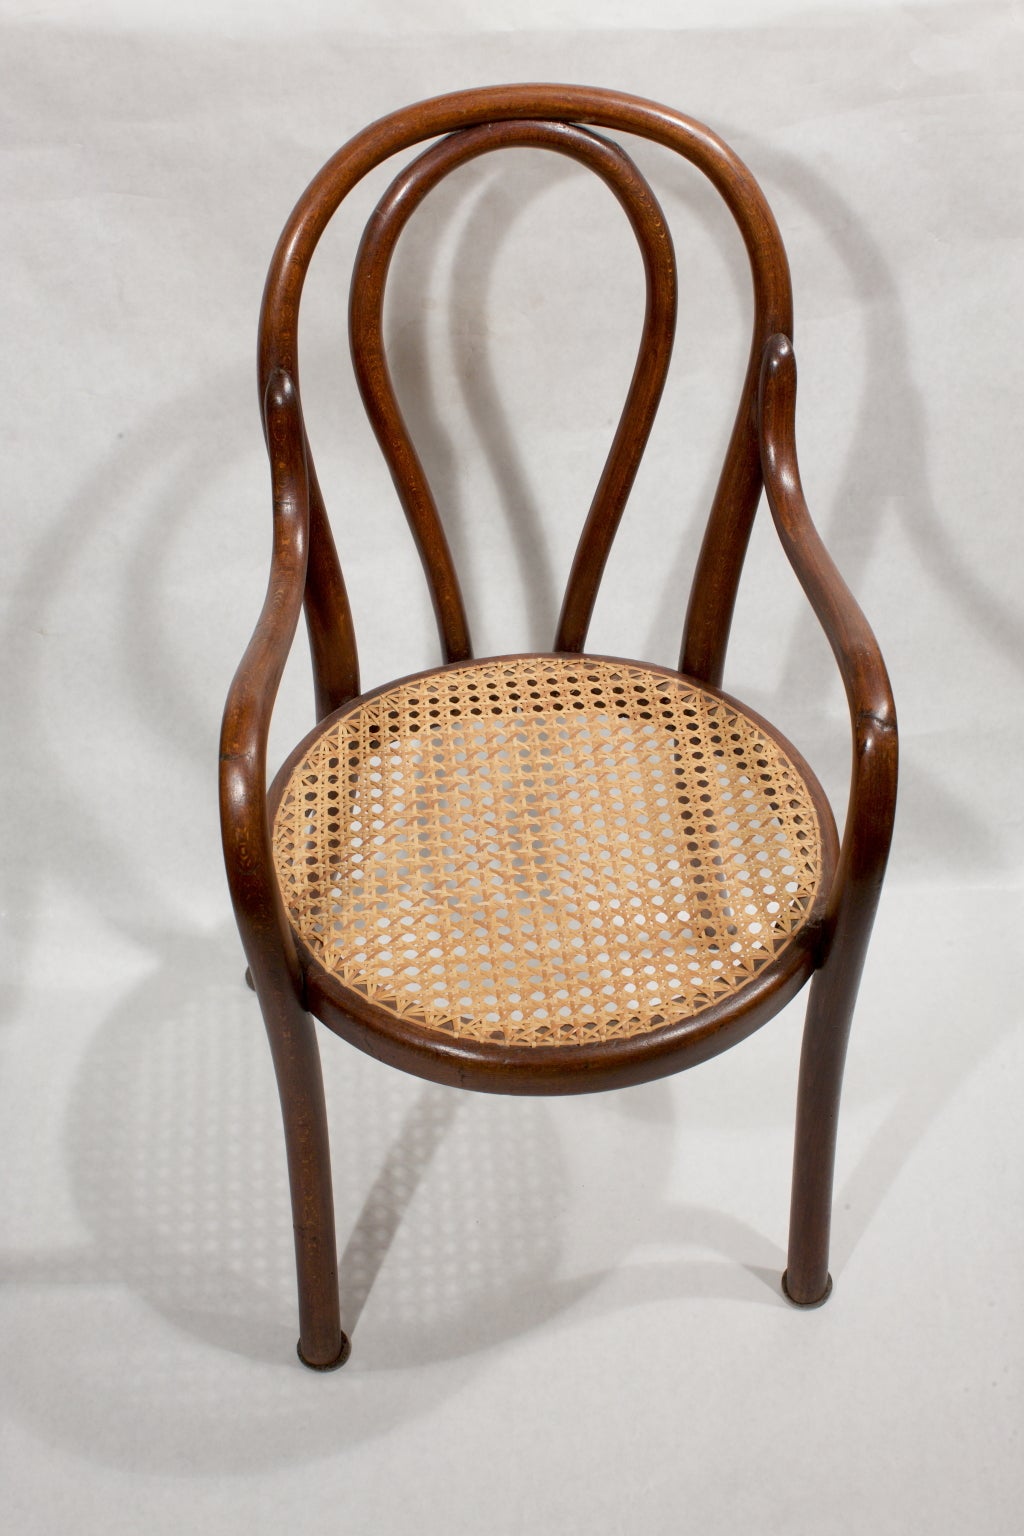 Thonet model for this old little chair for children, Vienna (Austria).